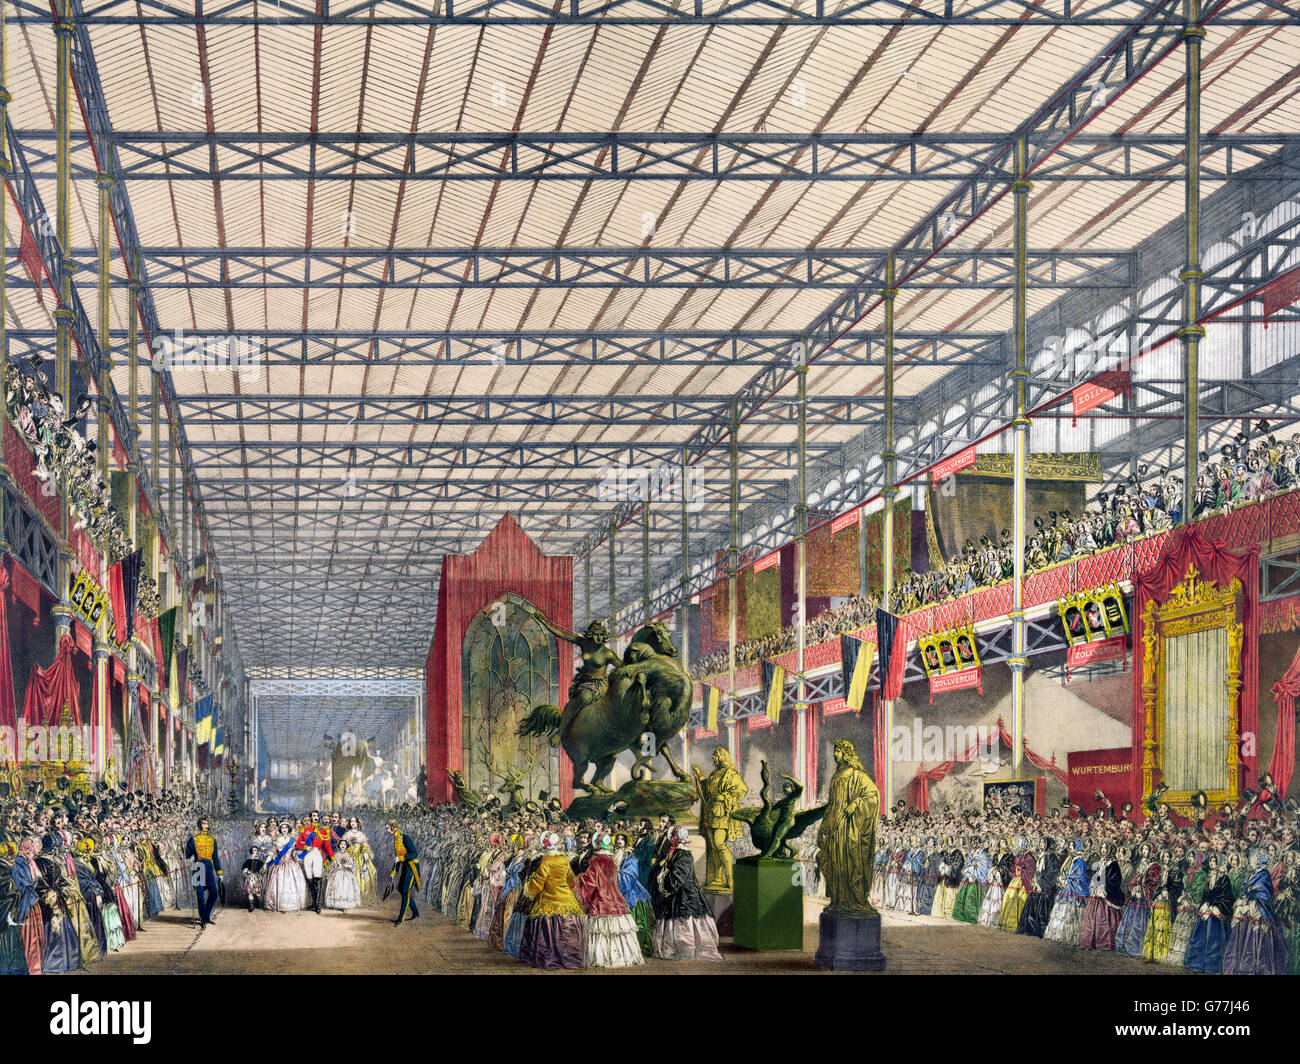 Great Exhibition, 1851. The Foreign Nave at The Great Exhibition of 1851, Crystal Palace, London, UK. Stock Photo